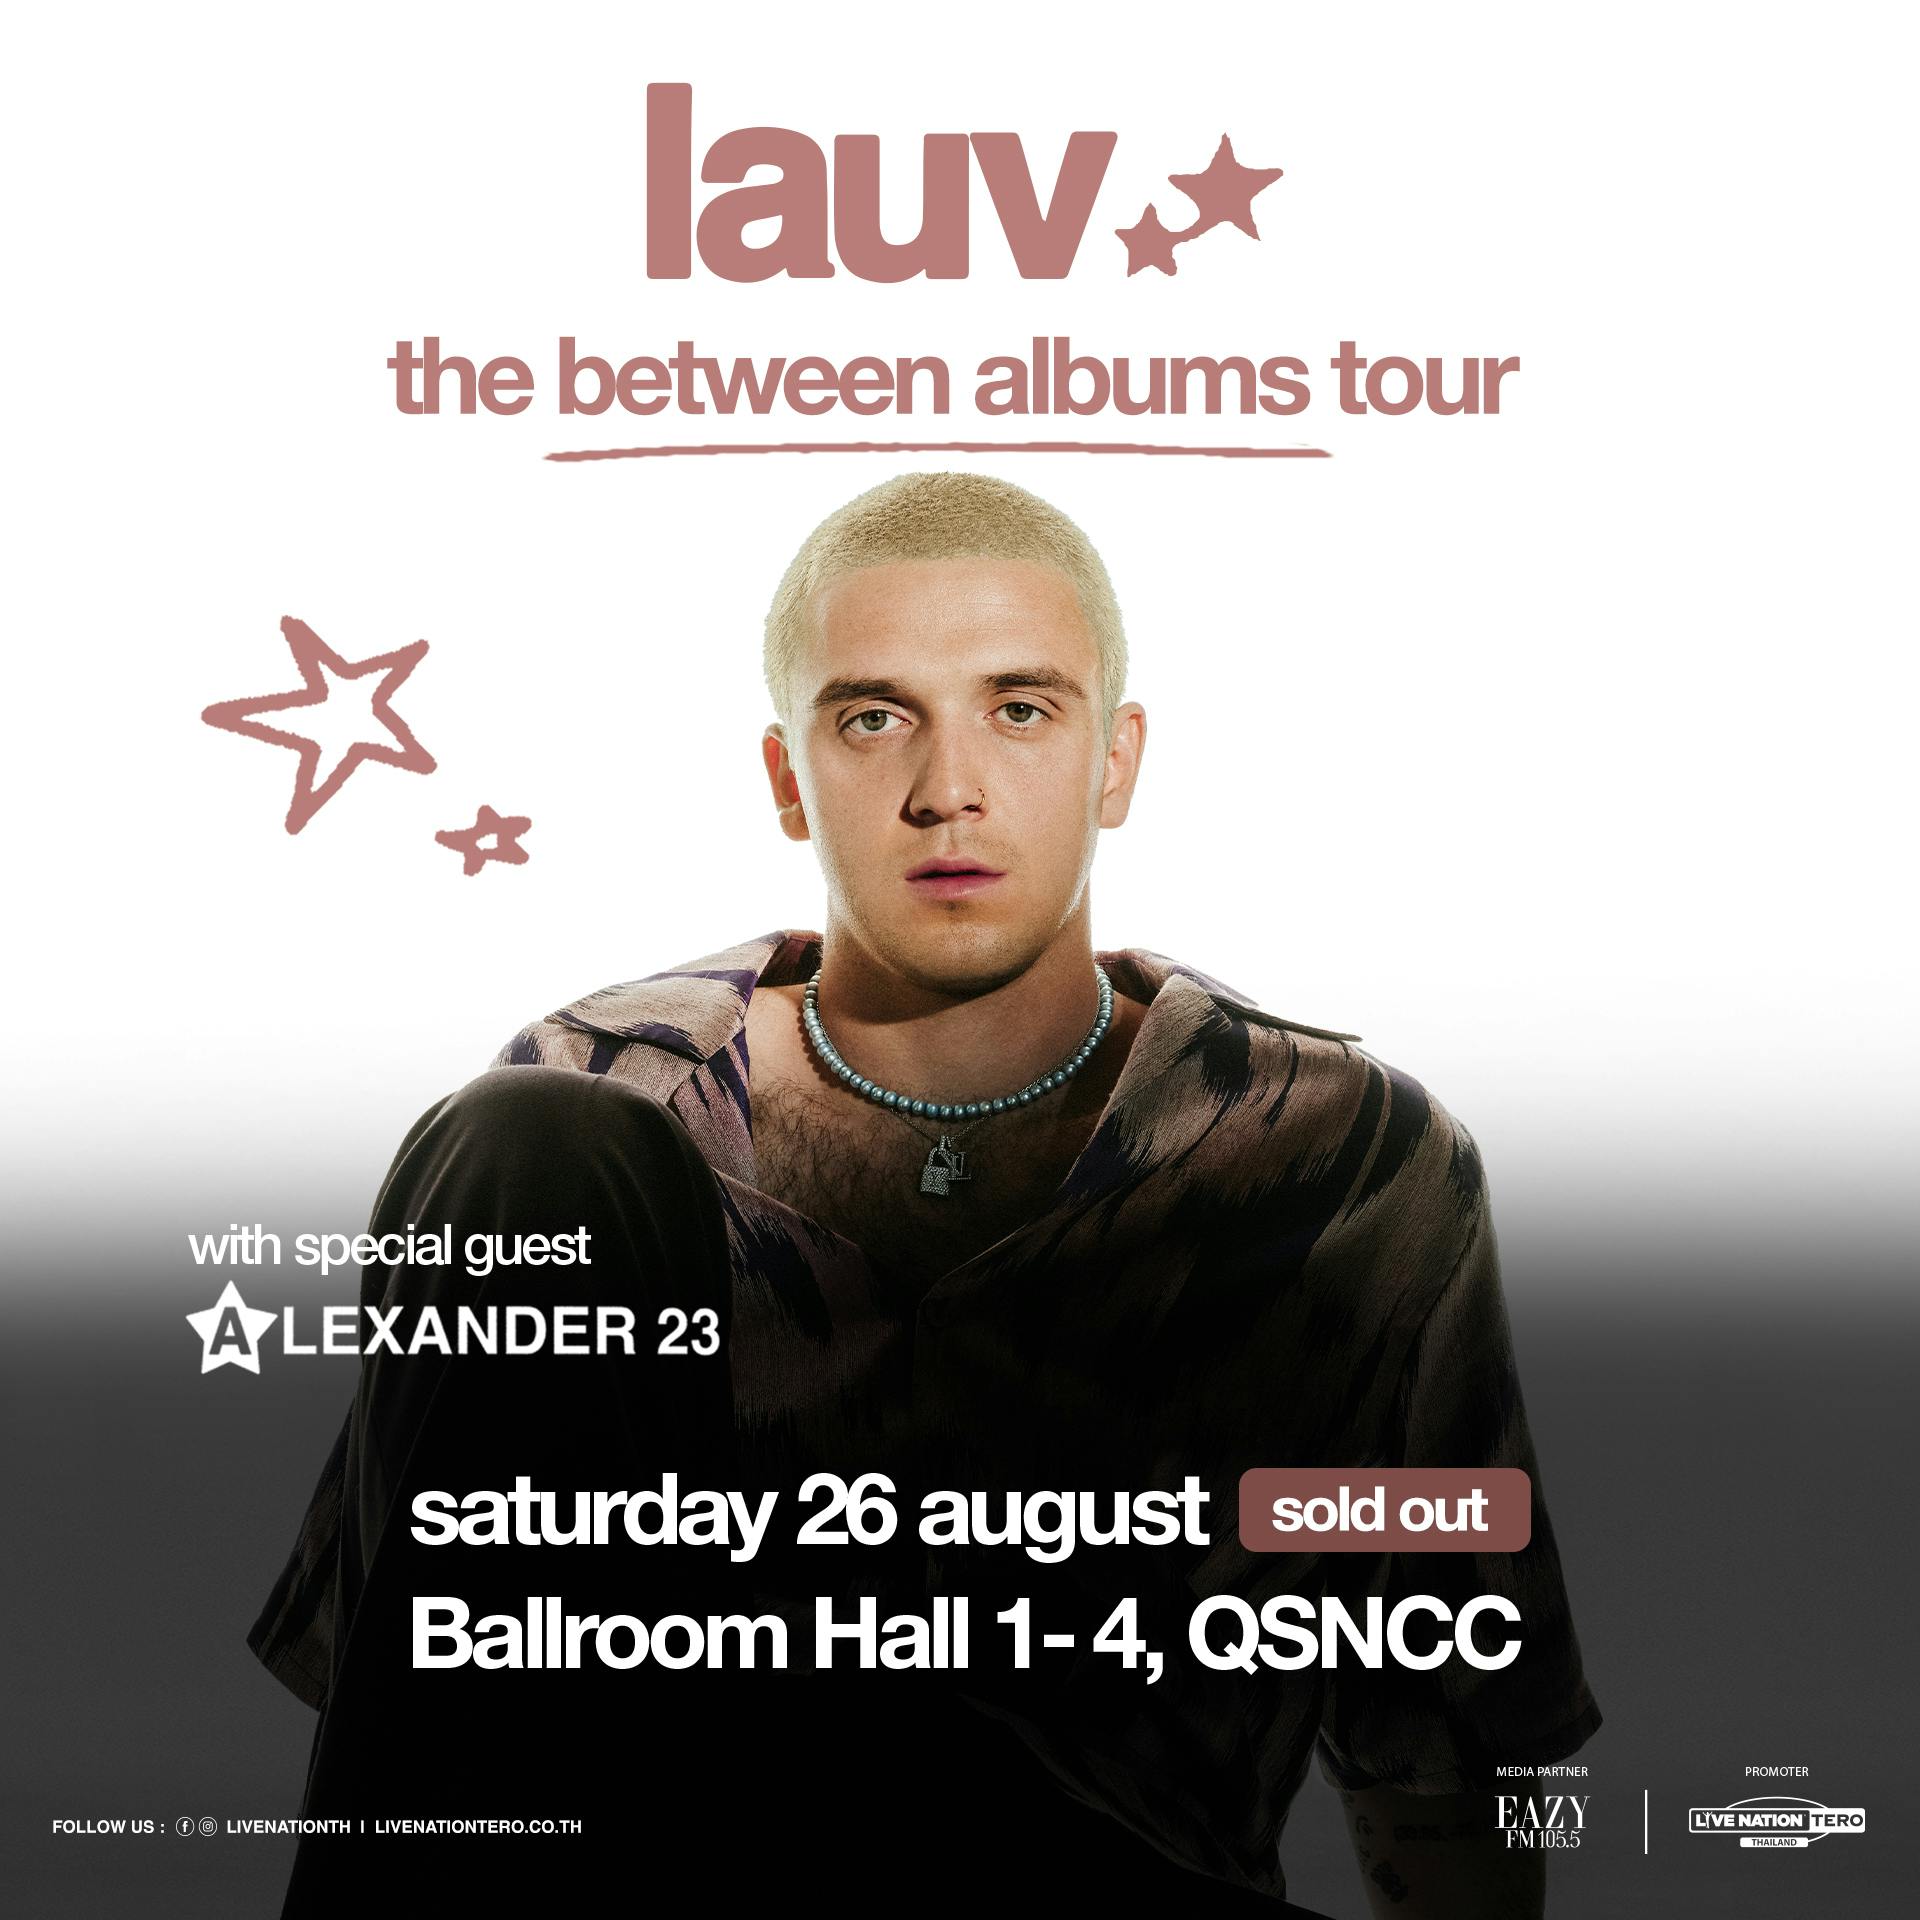 LAUV ‘the between albums tour’